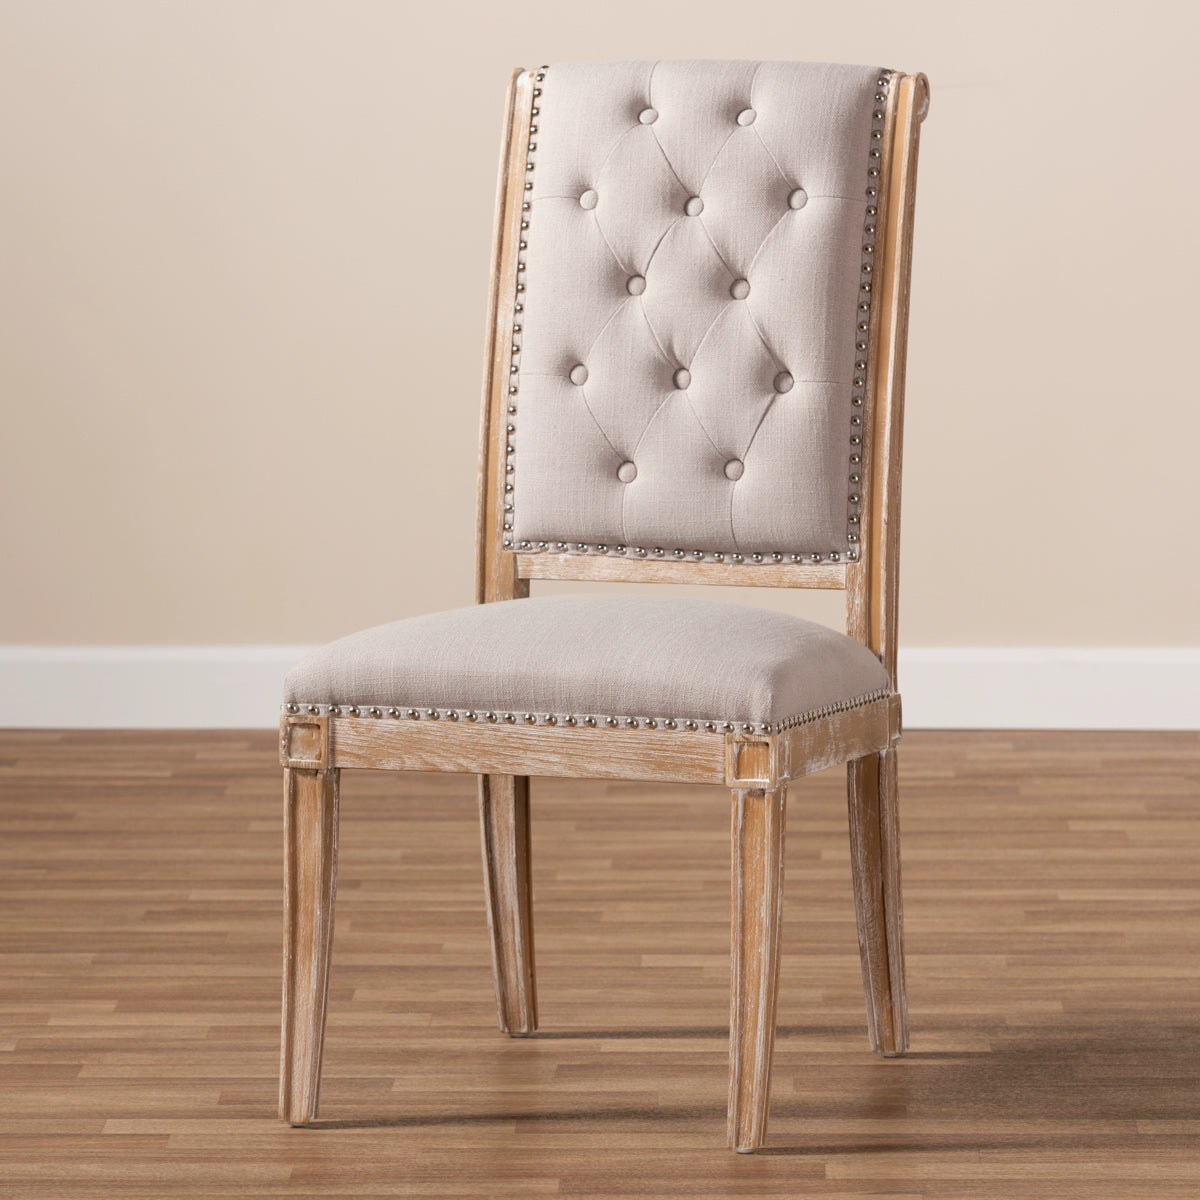 Baxton Studio Charmant French Provincial Beige Fabric Upholstered Weathered Oak Finished Wood Dining Chair Baxton Studio-dining chair-Minimal And Modern - 8